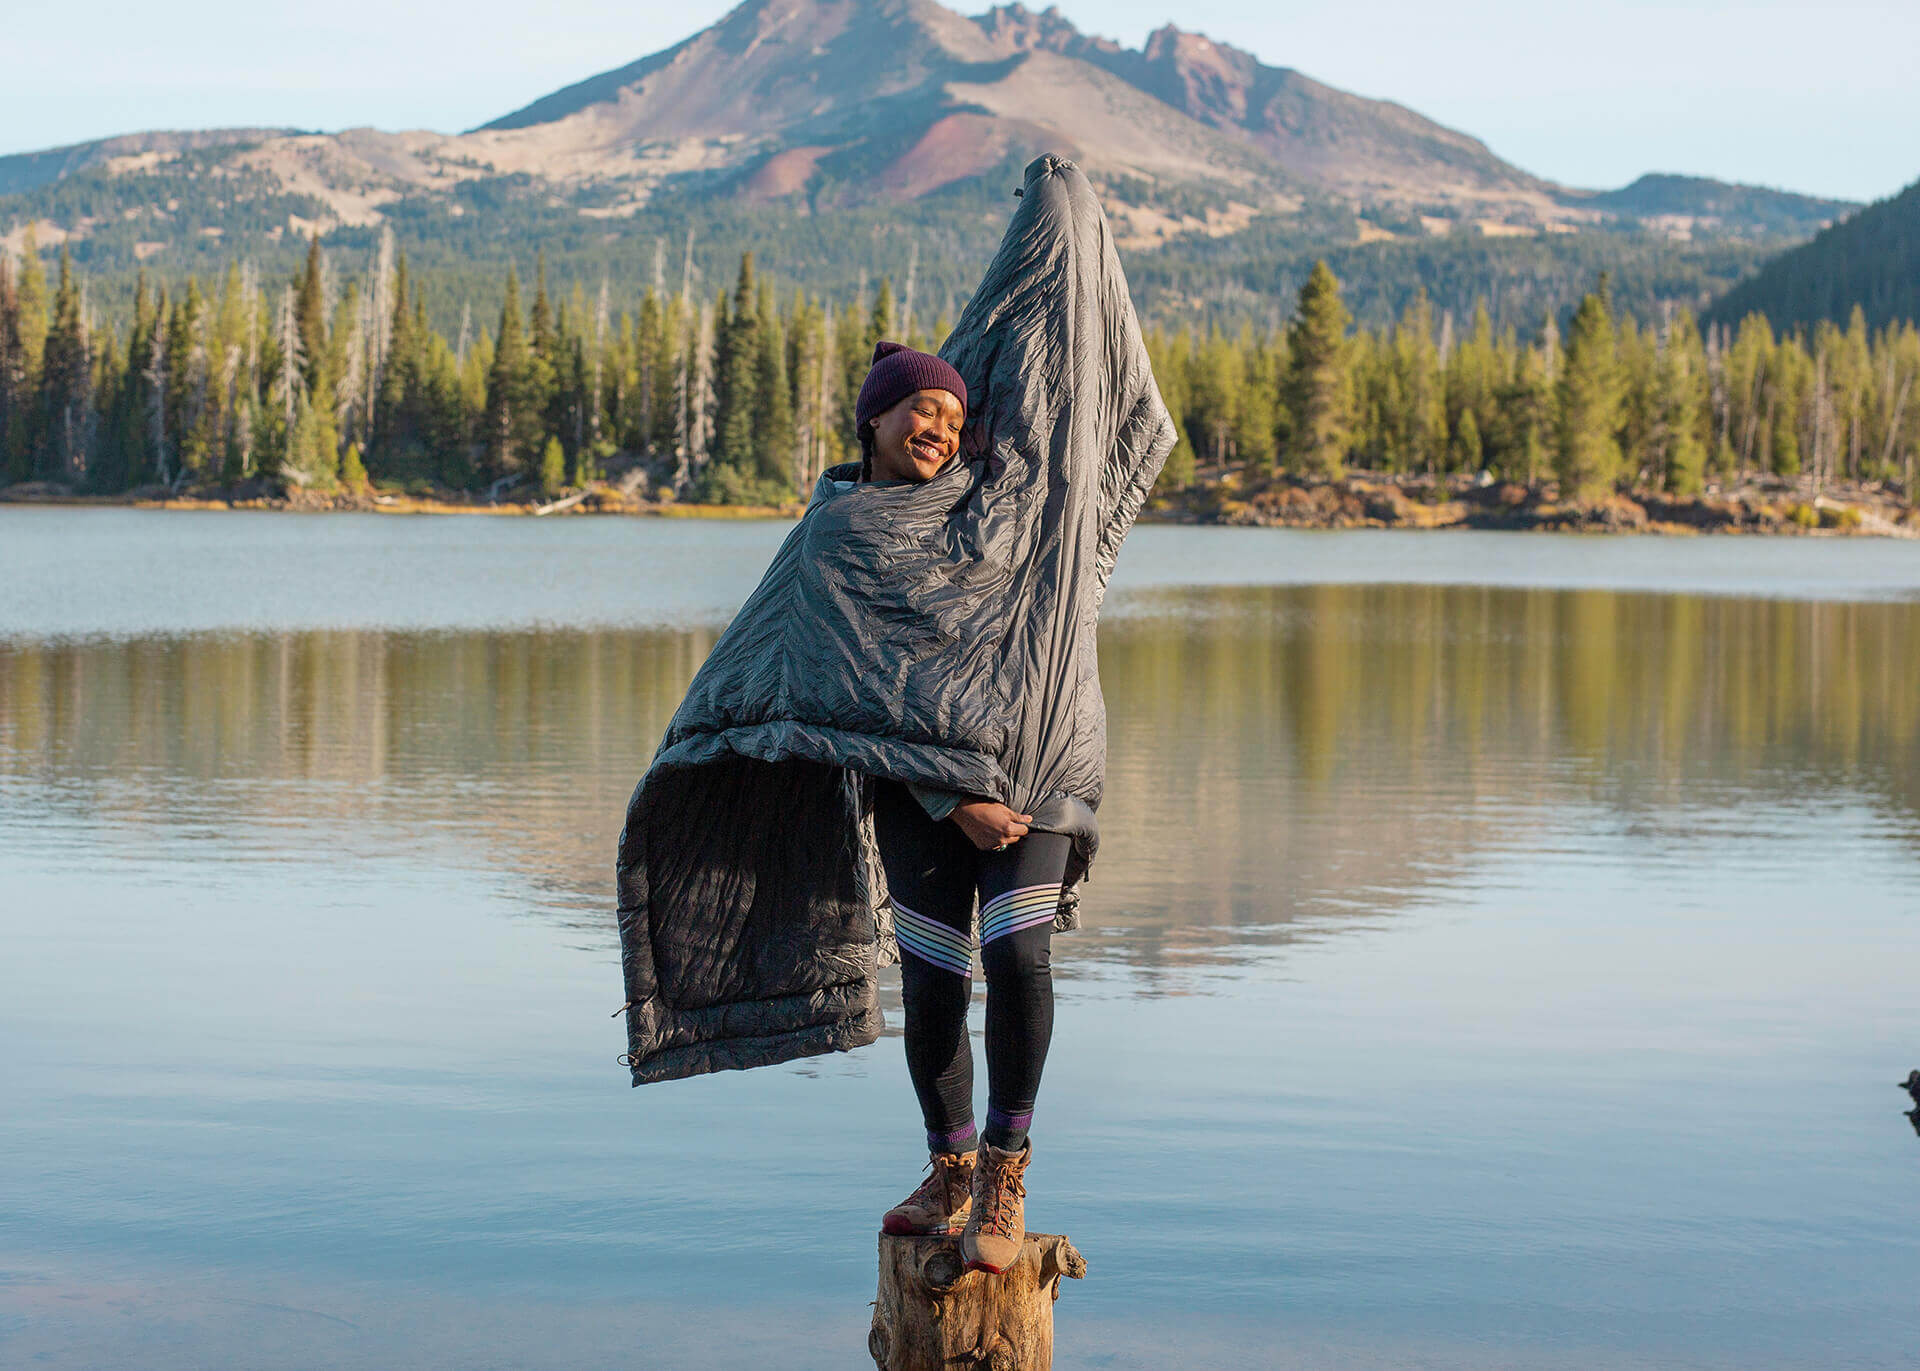 Kammok Firebelly 30 poncho quilt in Granite Gray, worn in hands-free poncho mode by girl standing on log in shallow water.